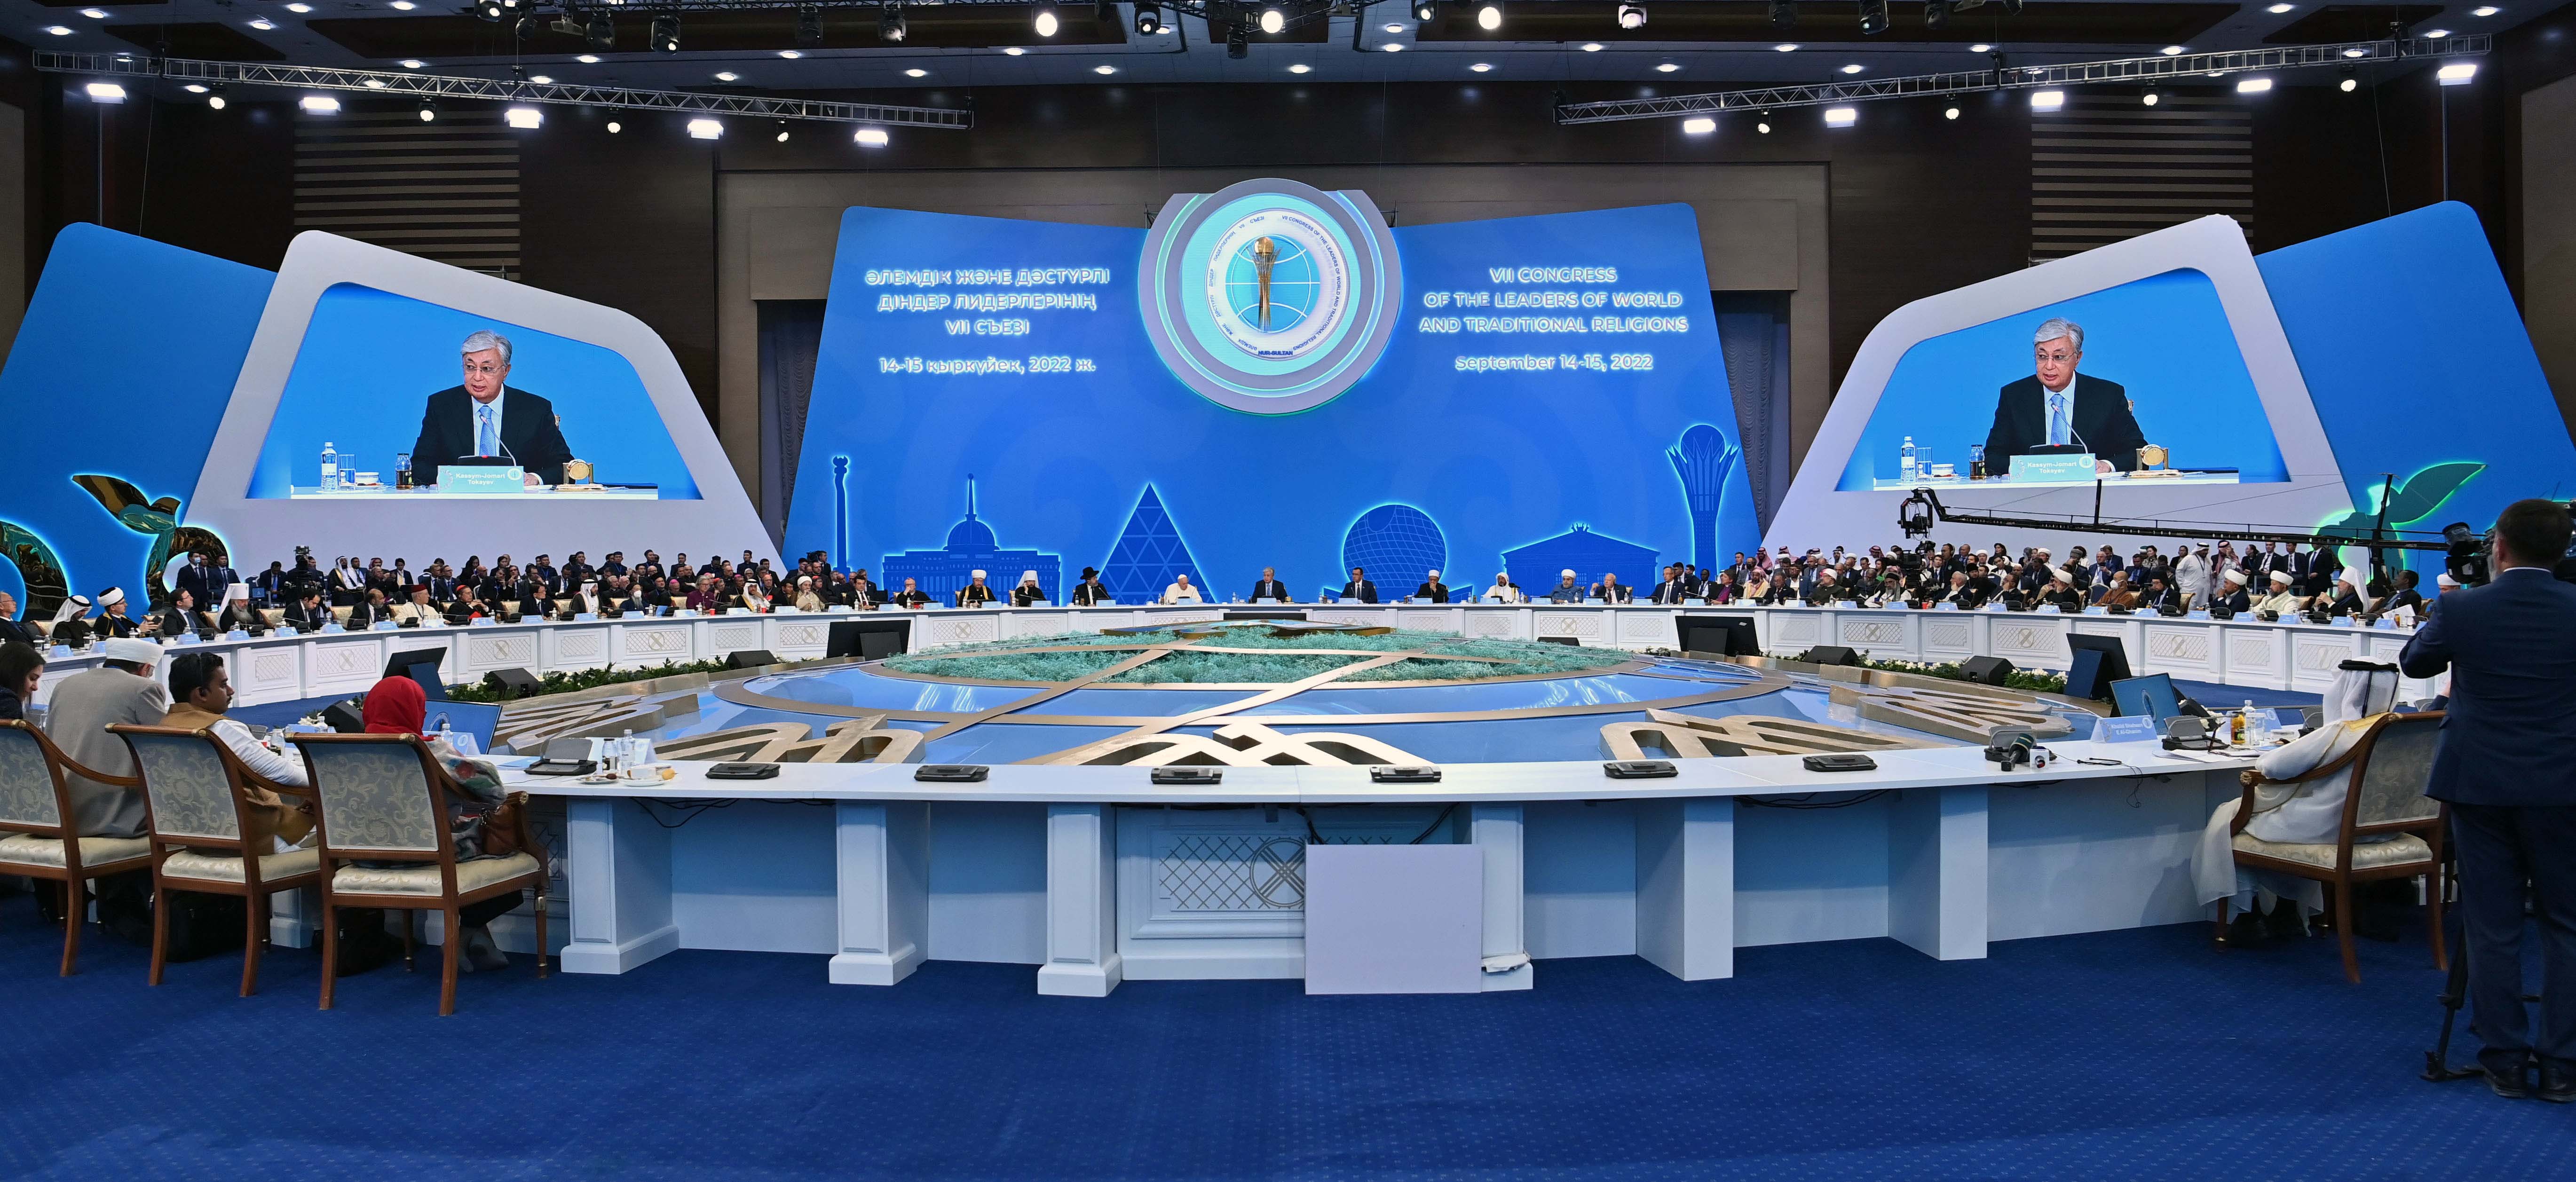 President Kassym-Jomart Tokayev participated in the closing ceremony of the VII Congress of Leaders of World and Traditional Religions